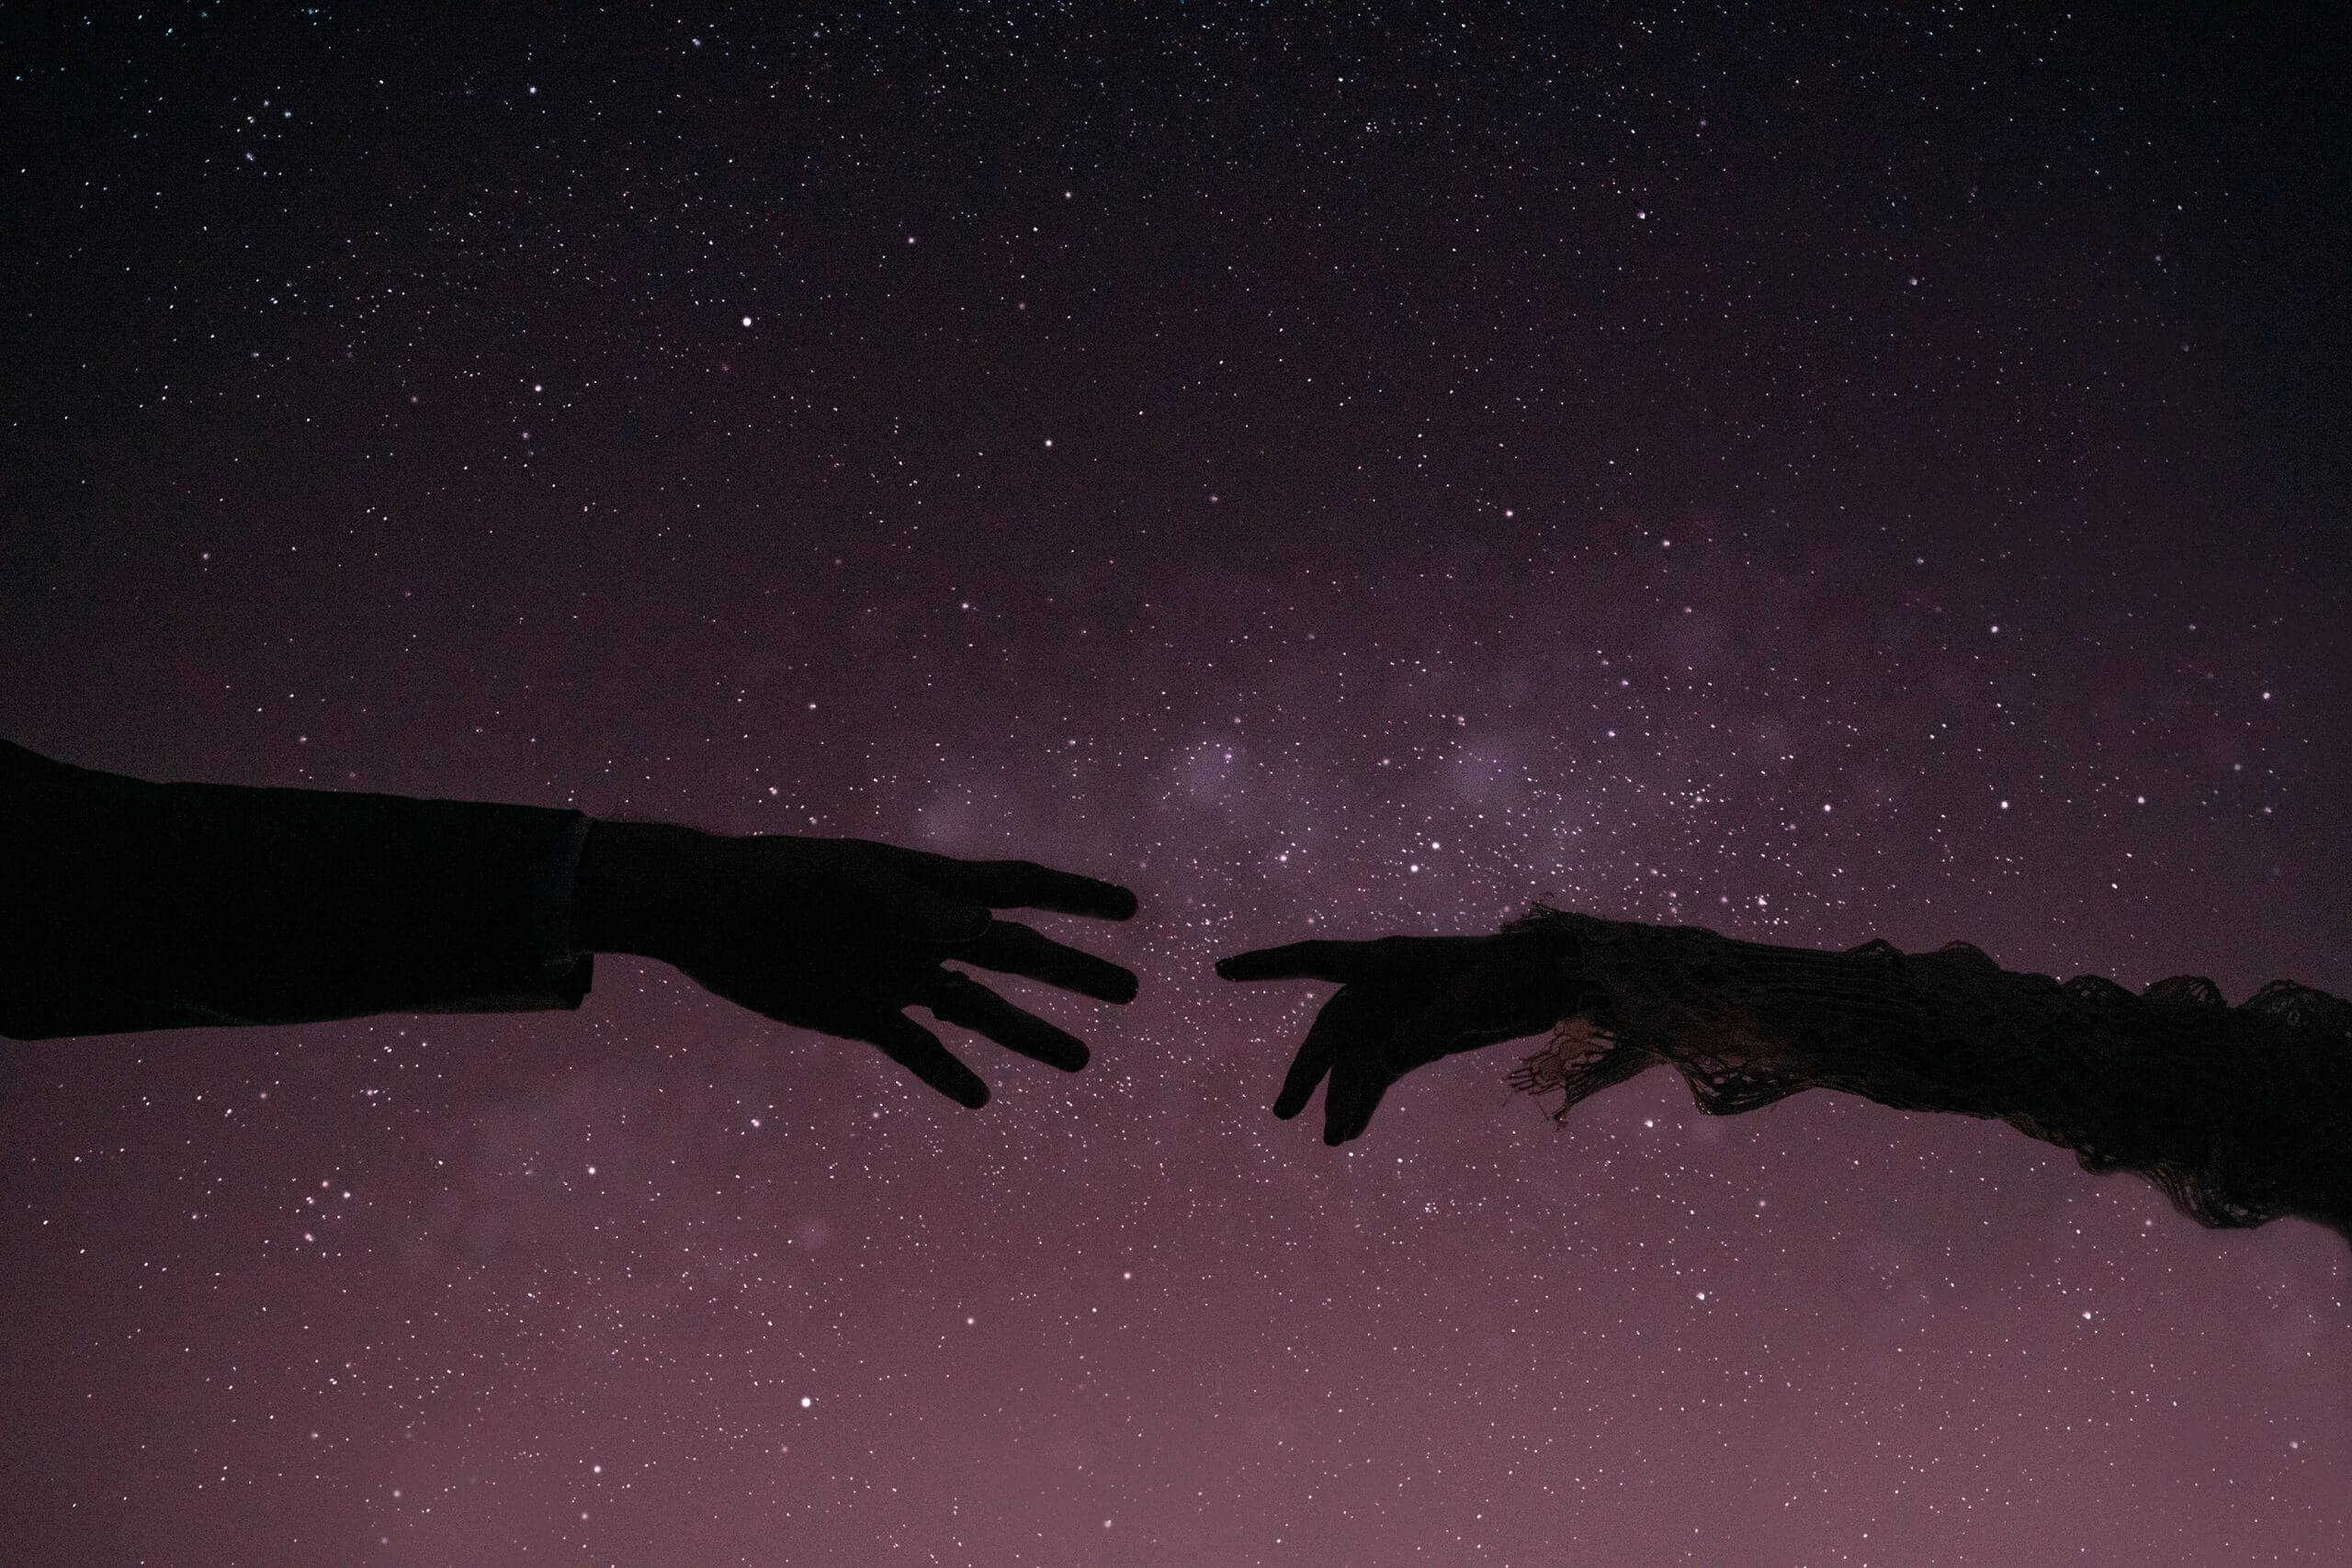 couples hands reach for each other in the dark underneath the starry night sky on blog dedicated to reasons to print your photos